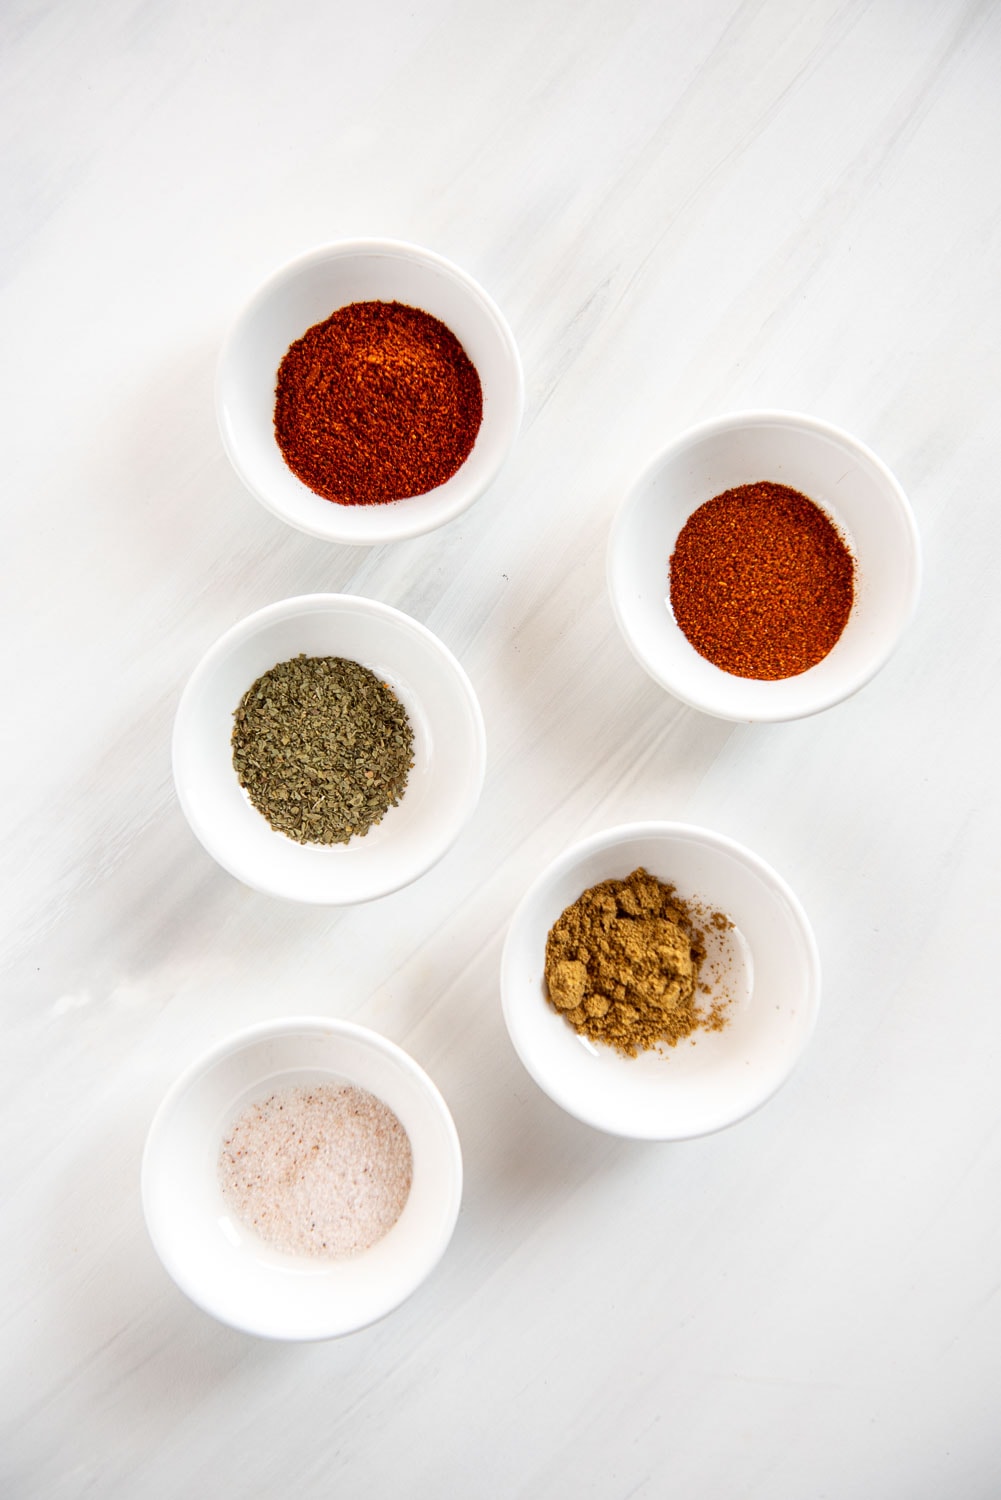 5 small dishes all containing different spices and seasonings